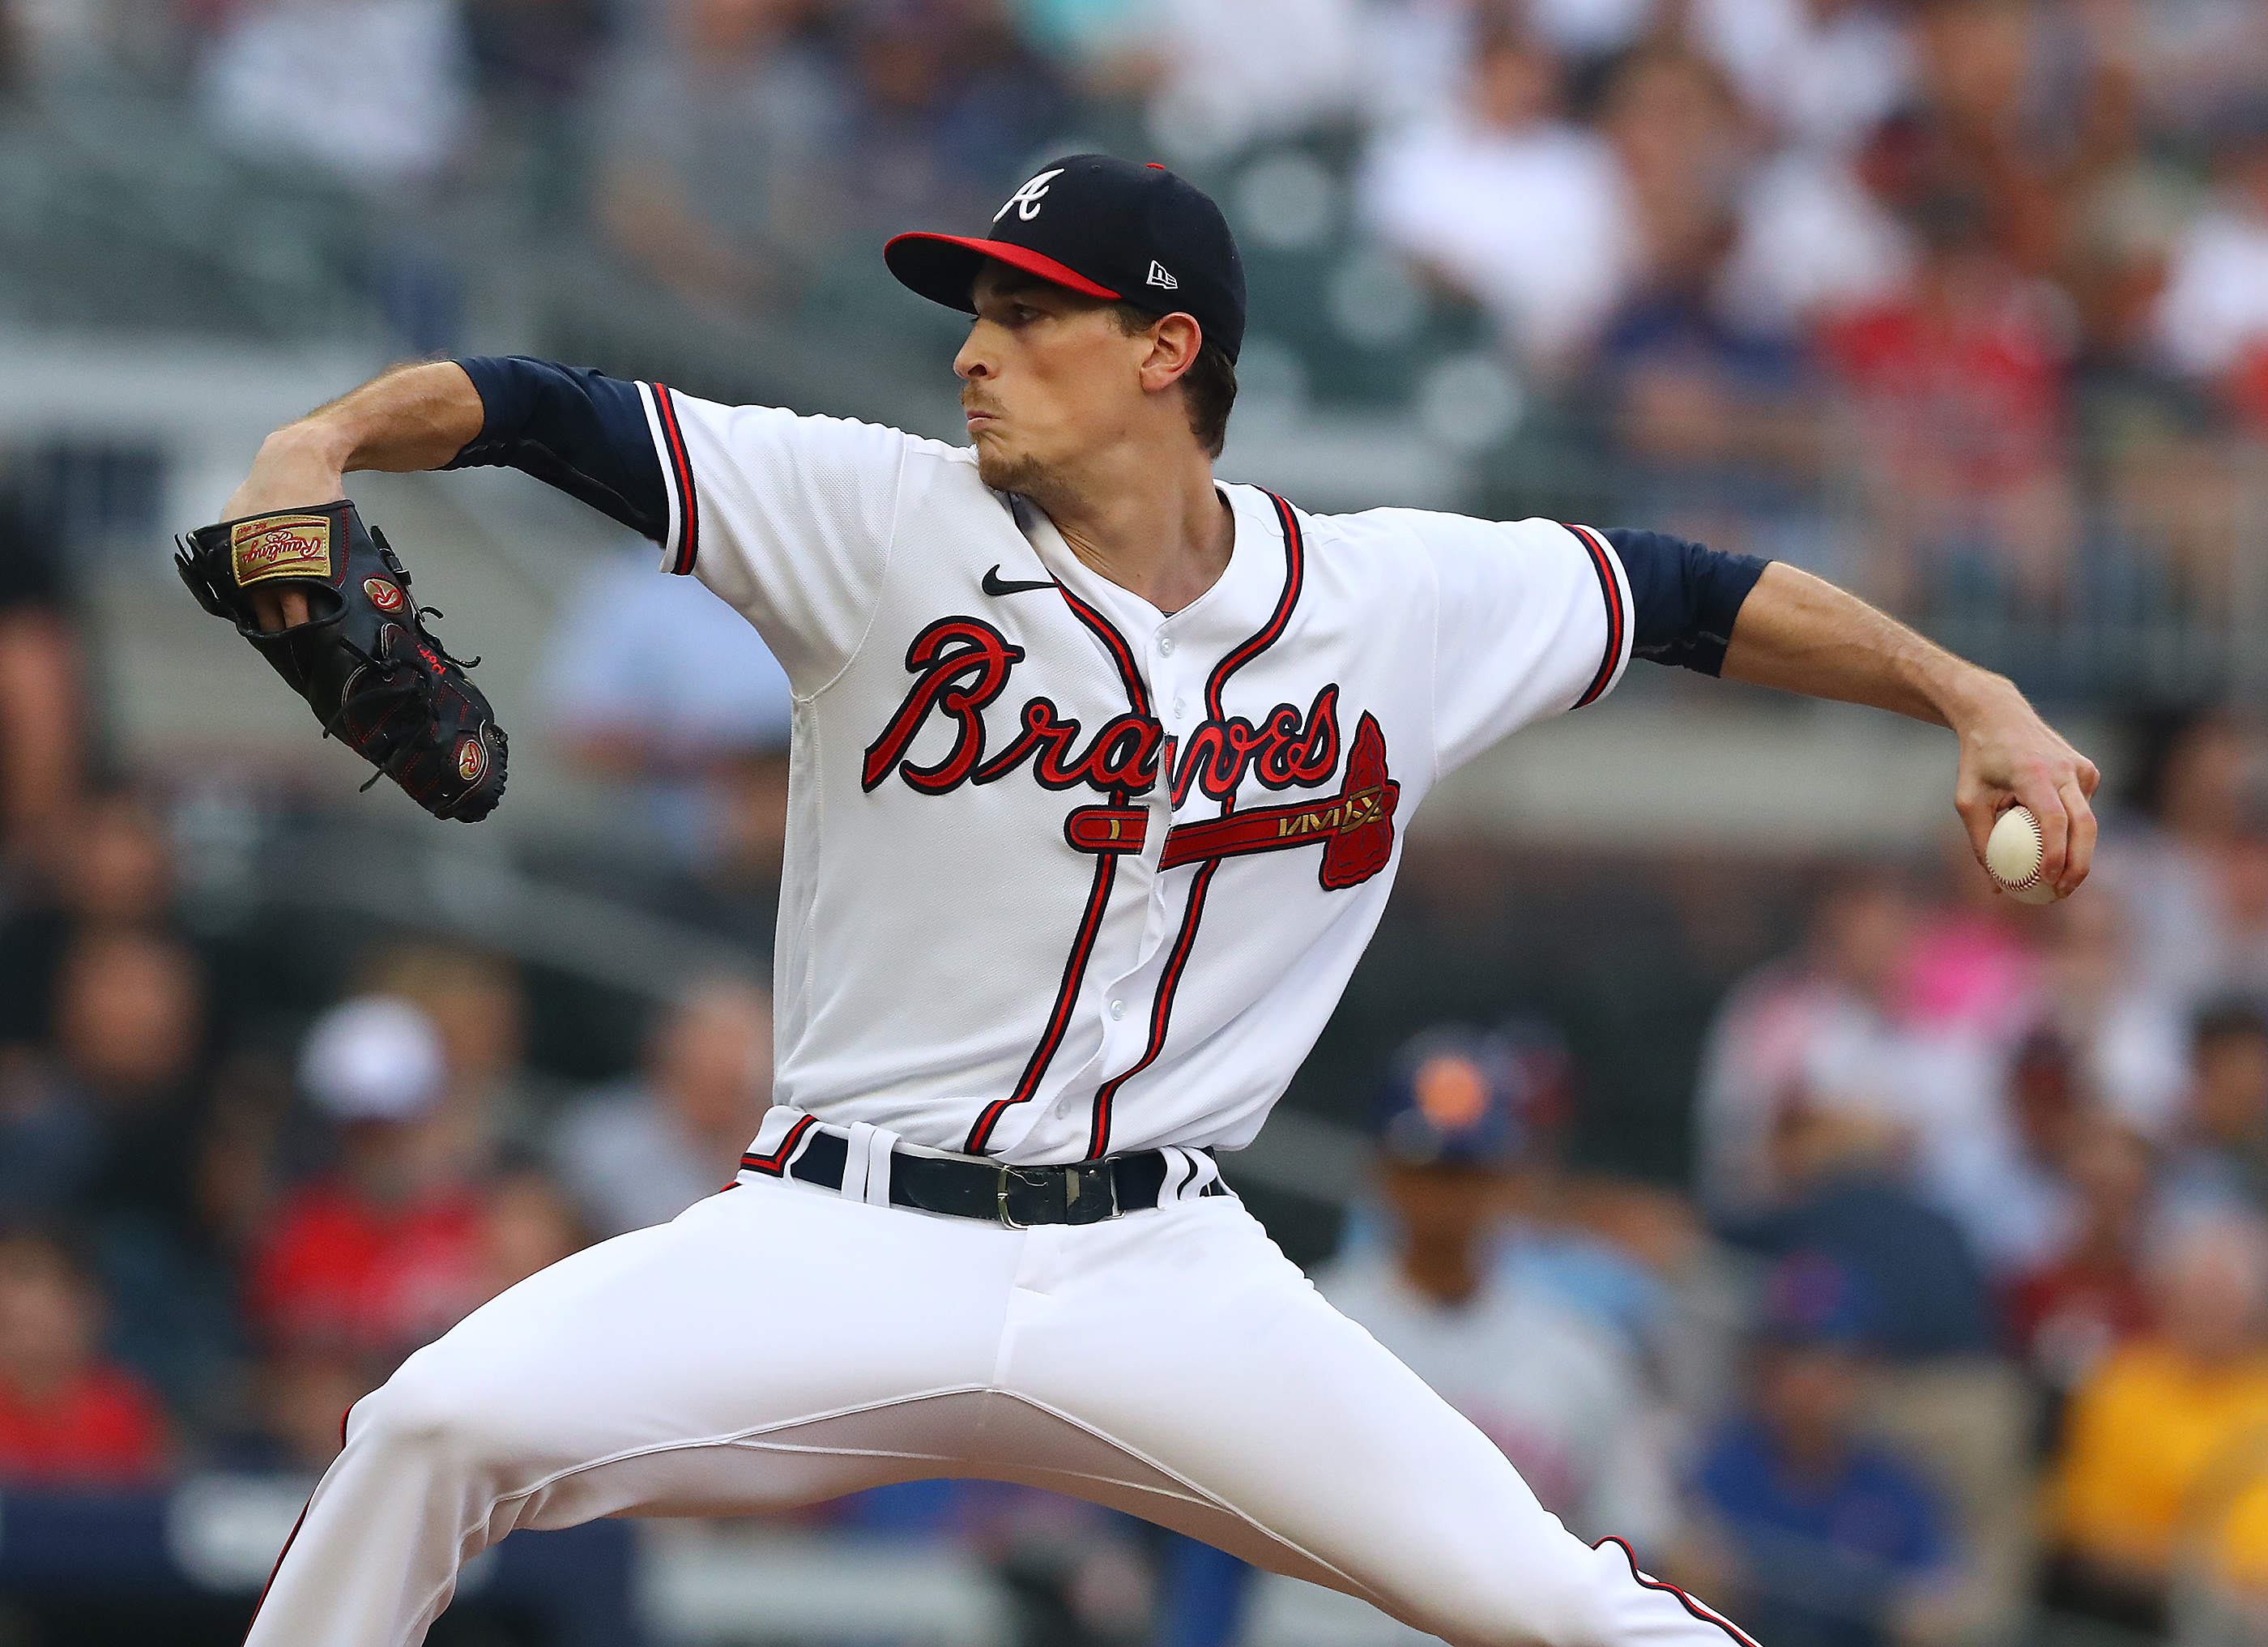 Max Fried wins second consecutive Gold Glove Award, for best